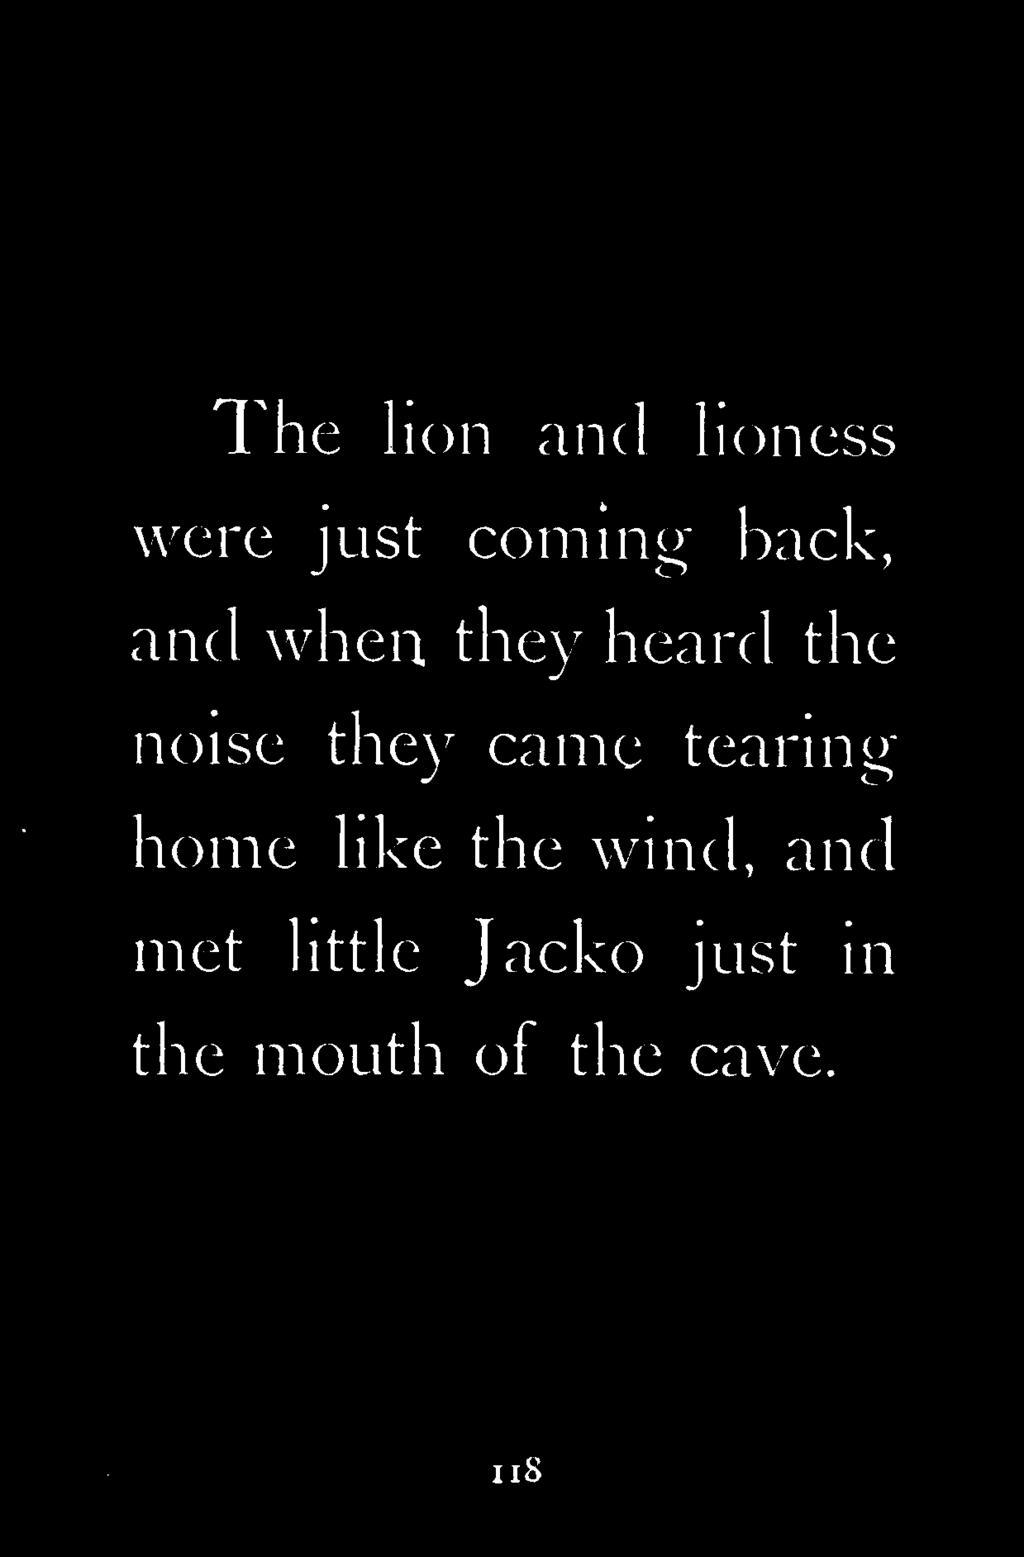 The lion and lioness were just coming back, and when they heard the noise they